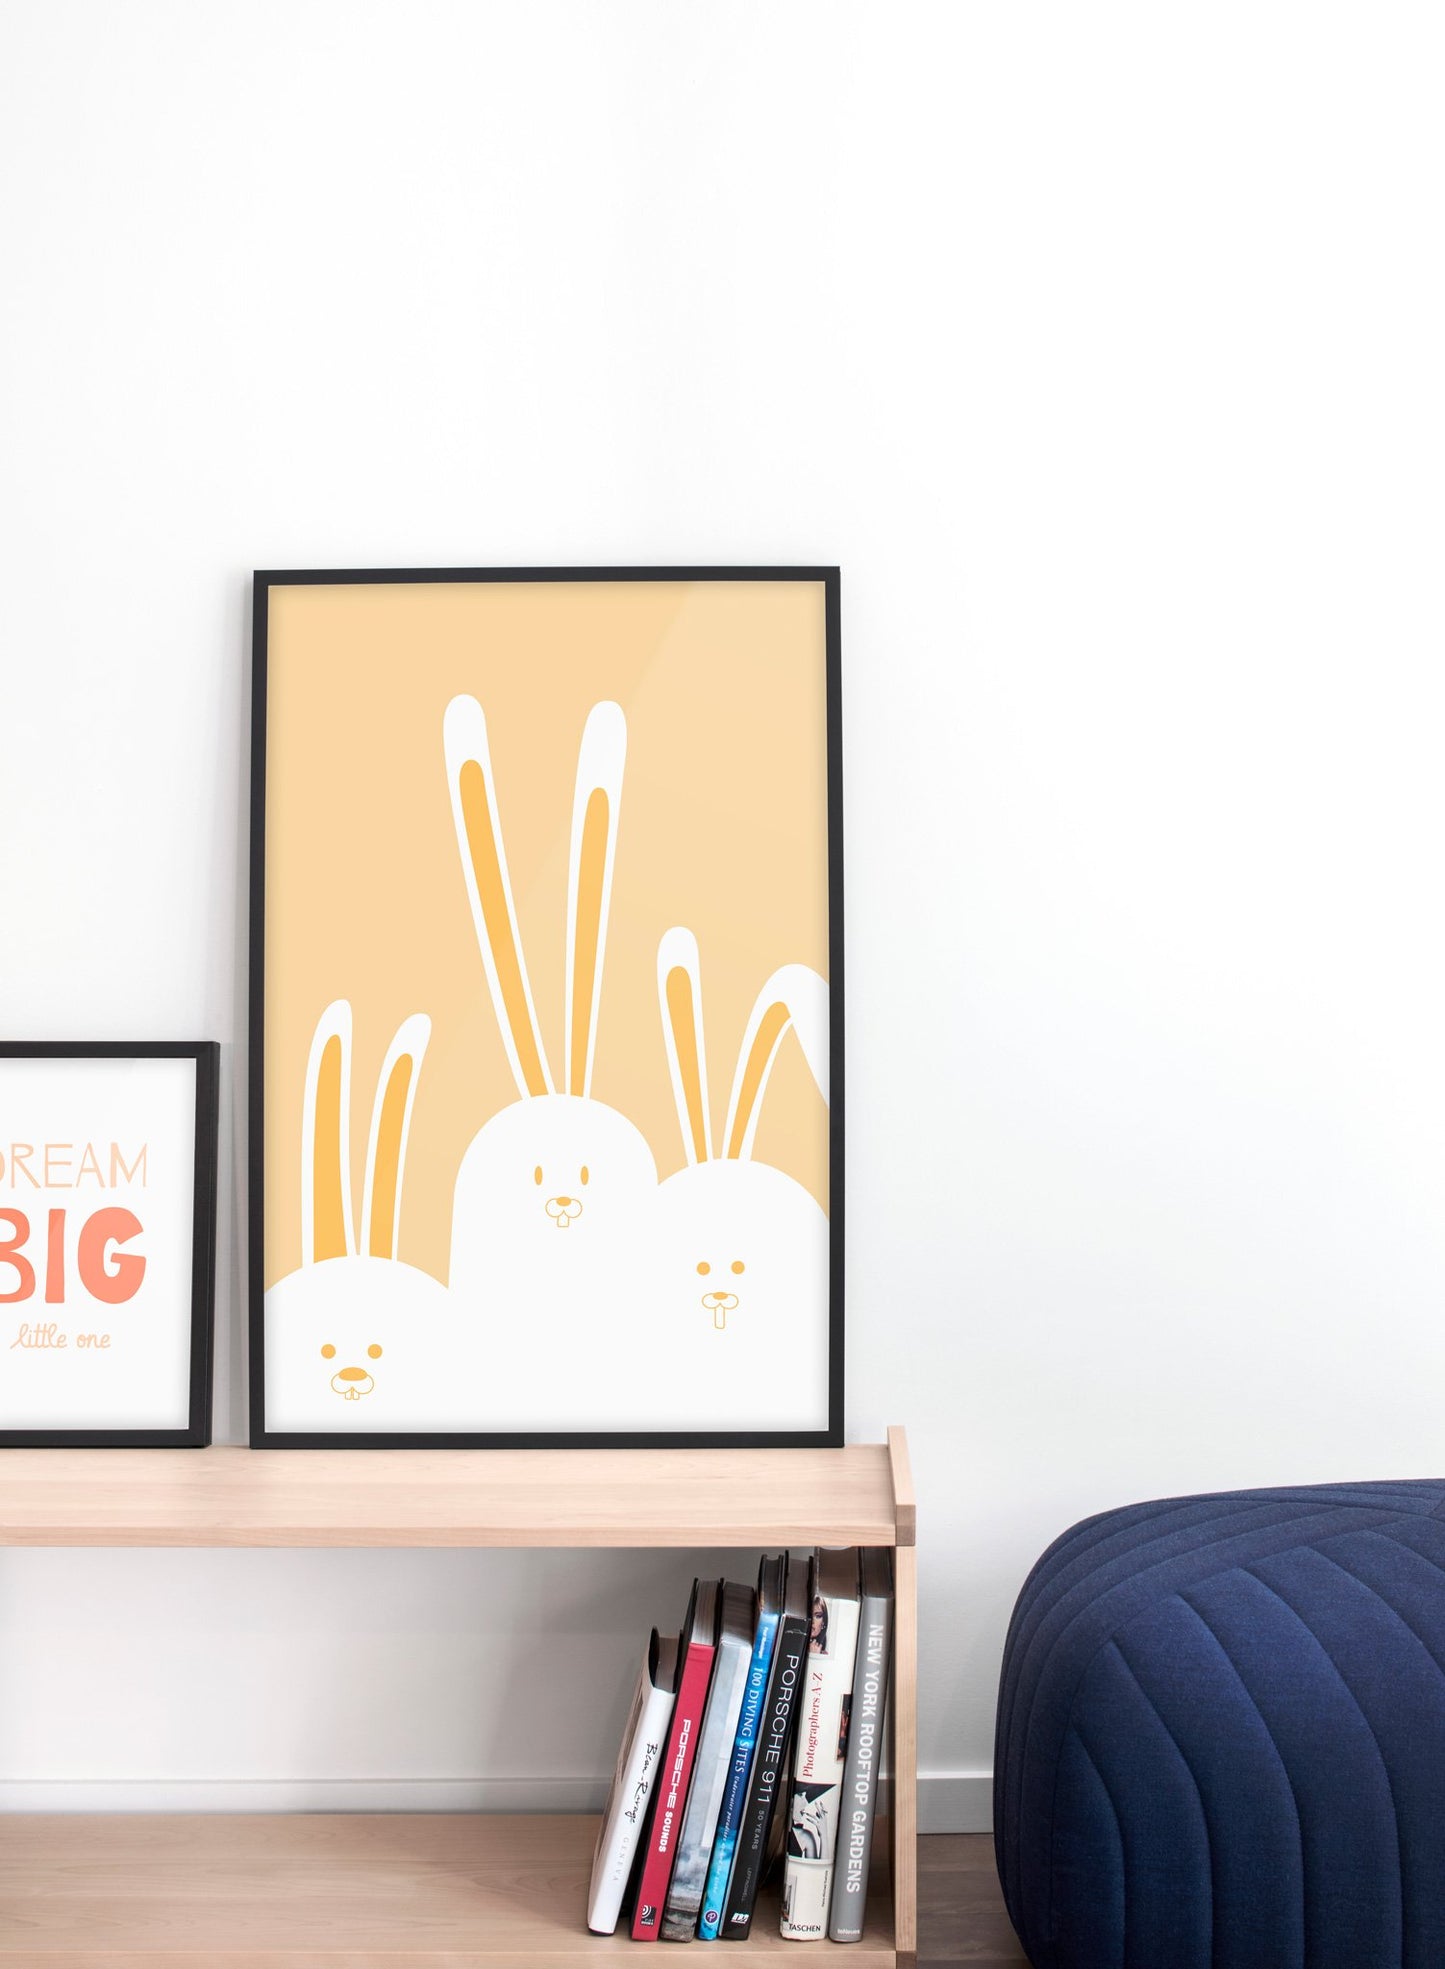 Modern minimalist poster by Opposite Wall with an illustration of a rabbit family - kids collection